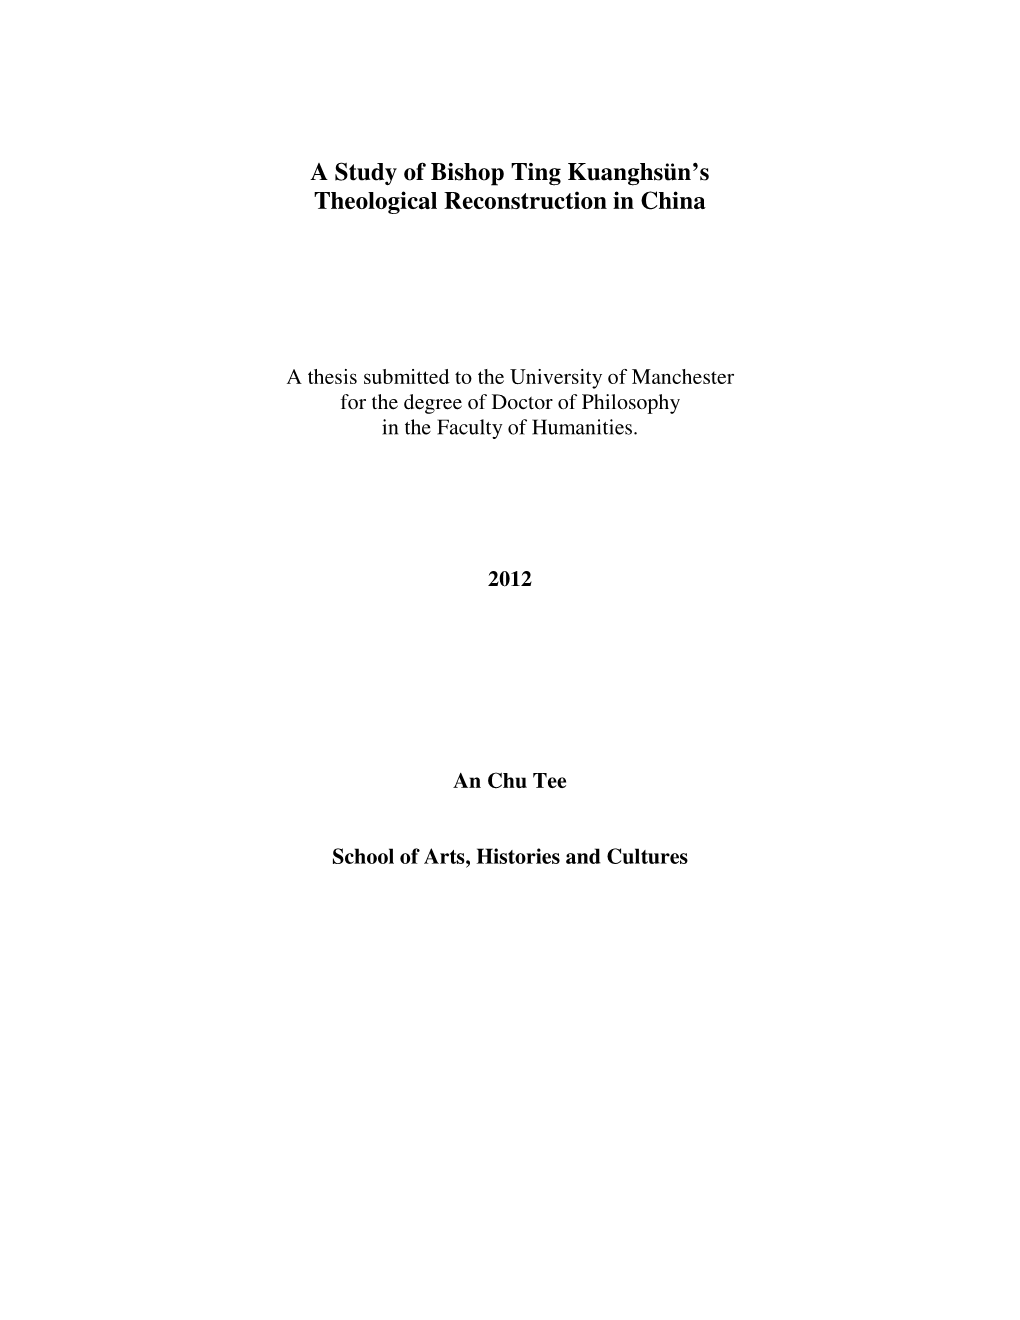 A Study of Bishop Ting Kuanghsün's Theological Reconstruction in China